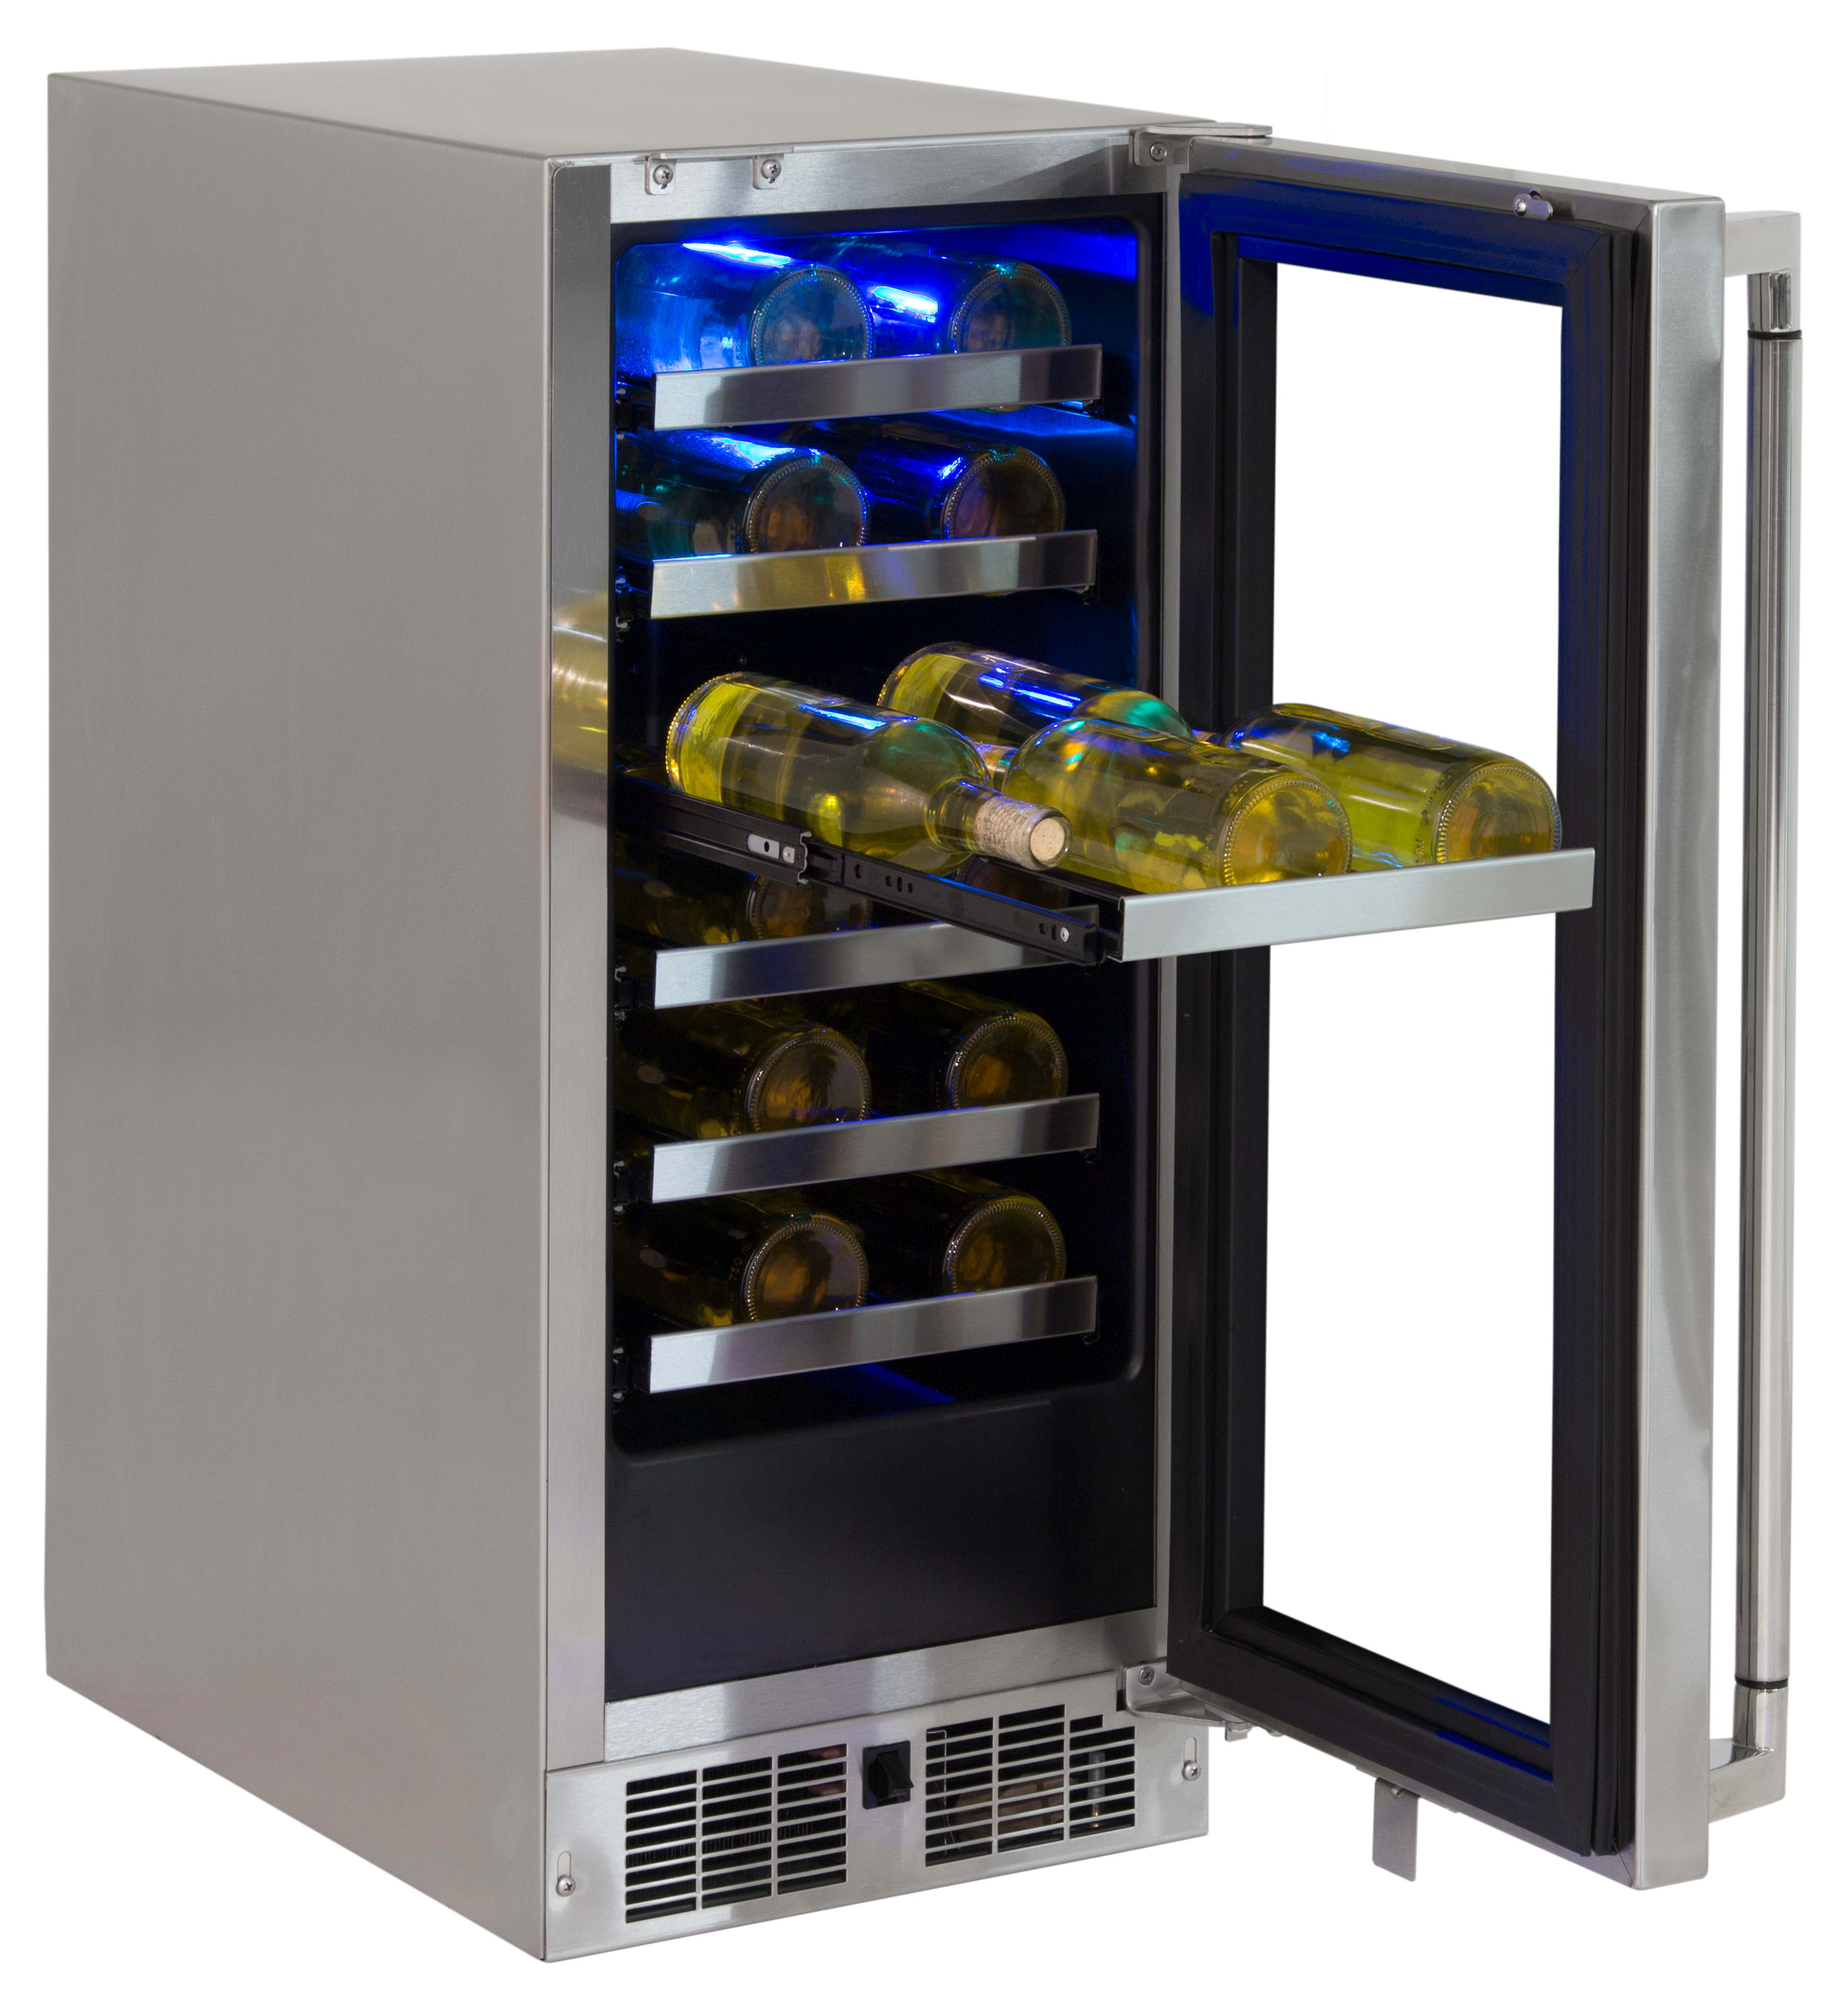 Lynx Grills Wine Coolers Beverage, Outdoor Rated Wine Coolers